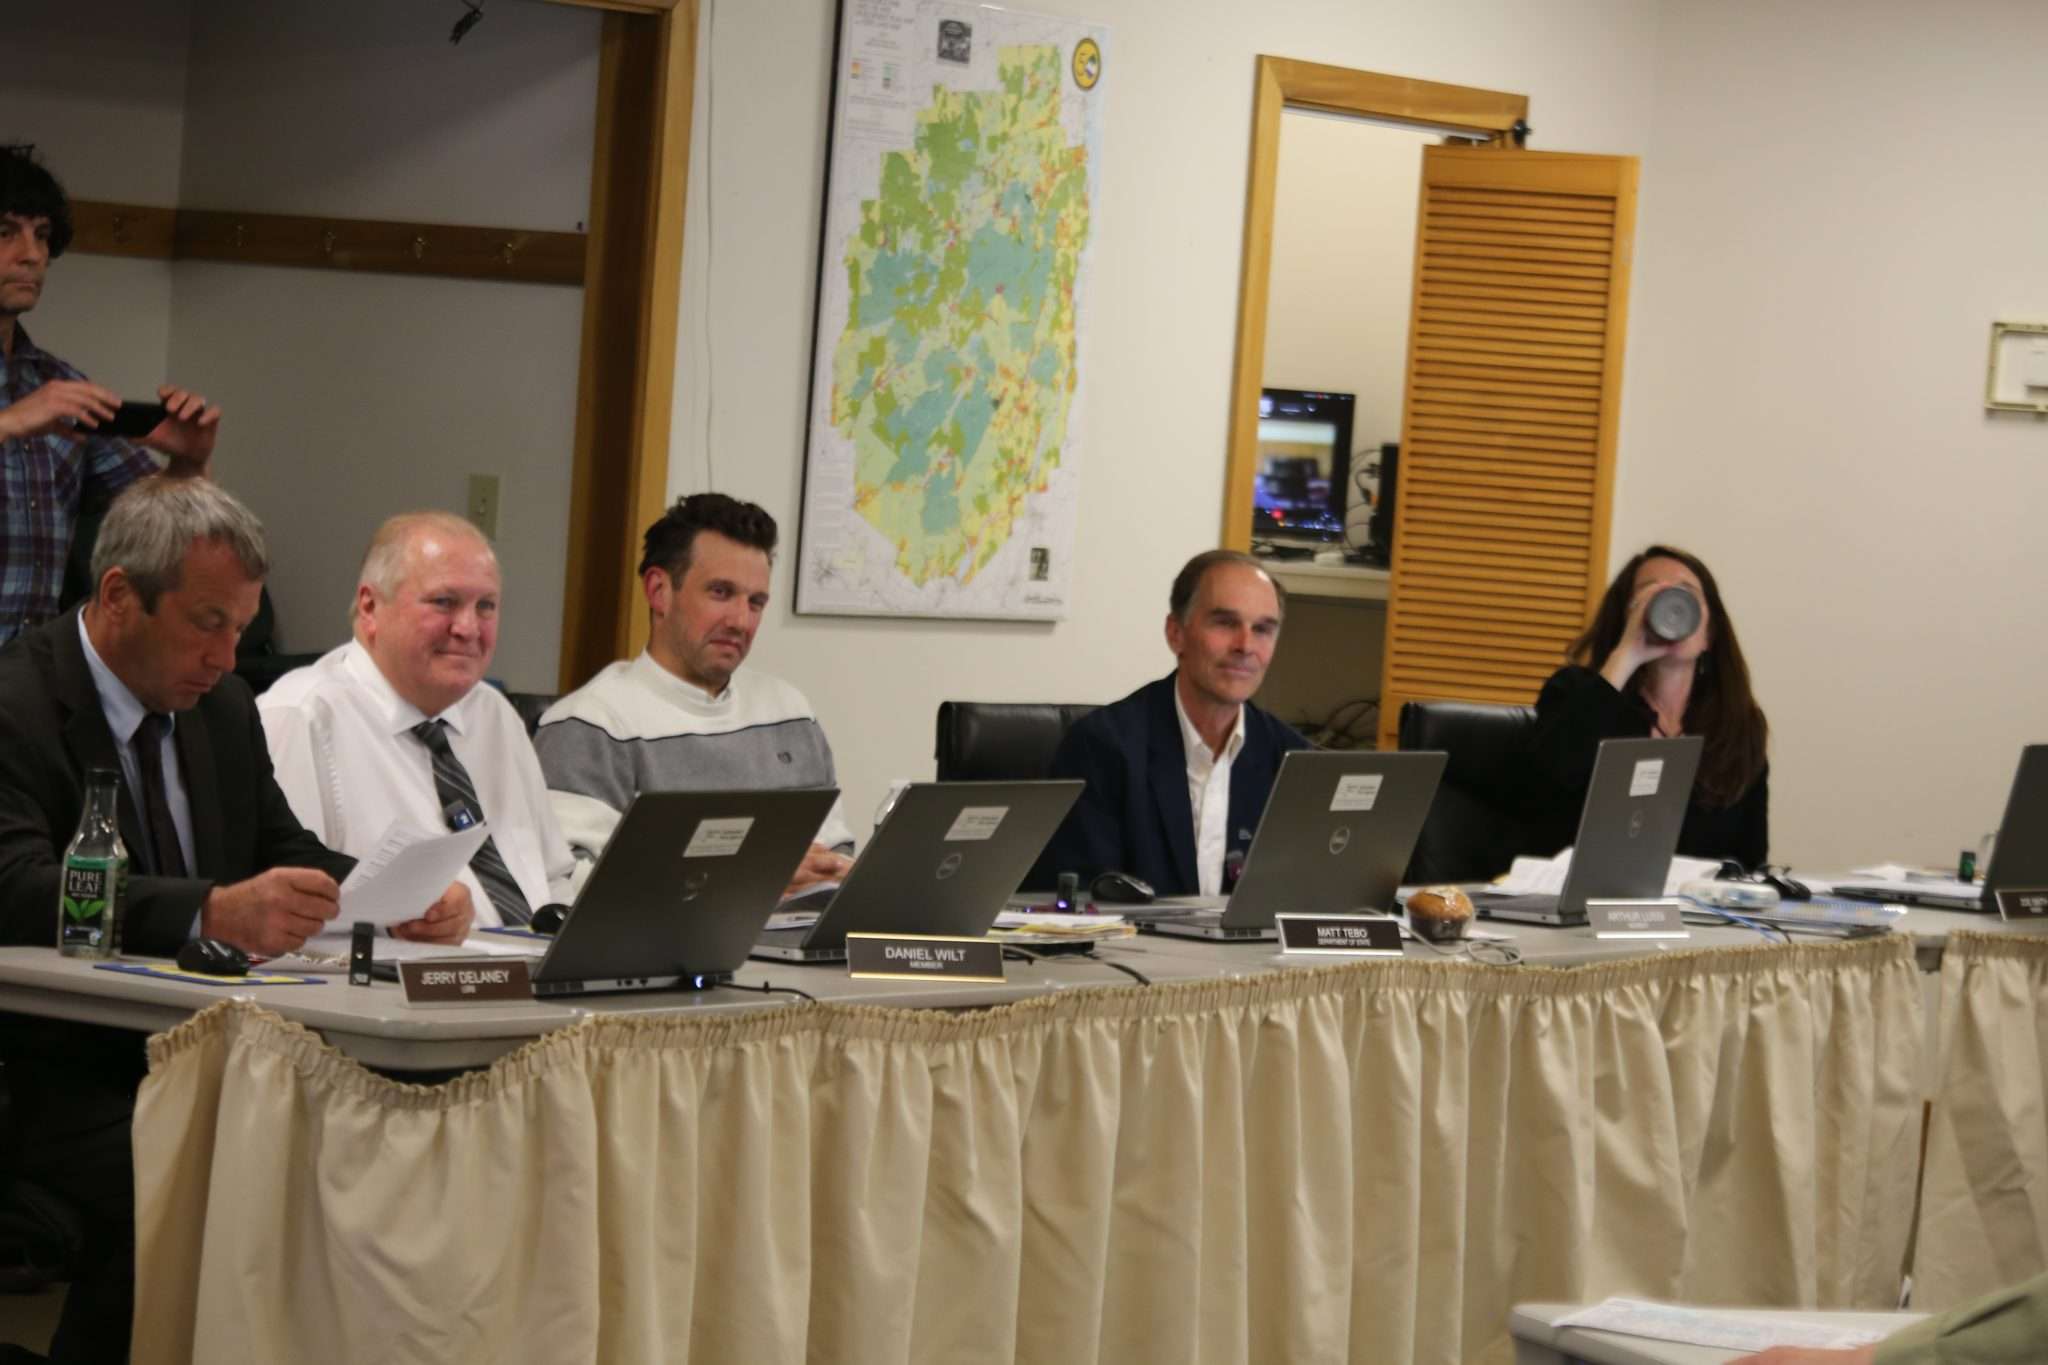 Board members of the Adirondack Park Agency sit at a table